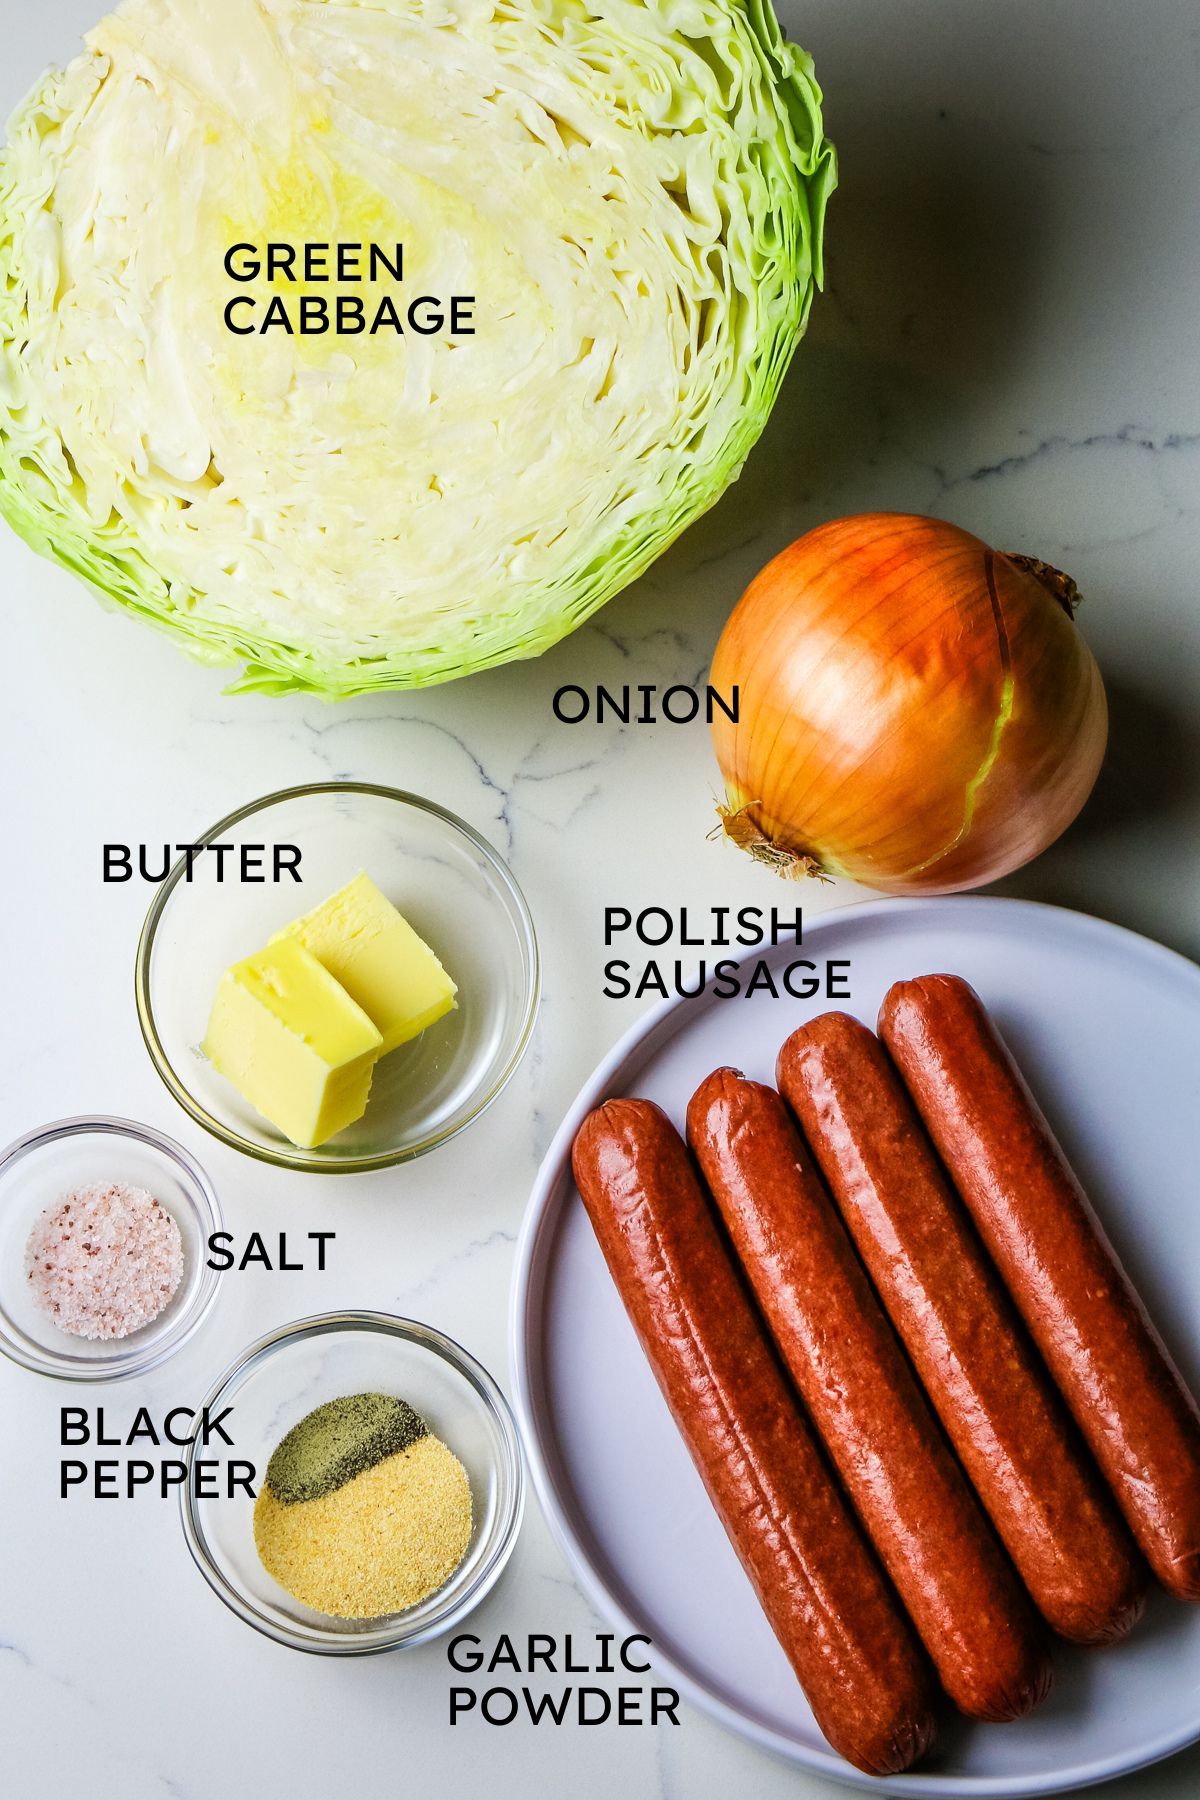 ingredients for fried cabbage with sausage.